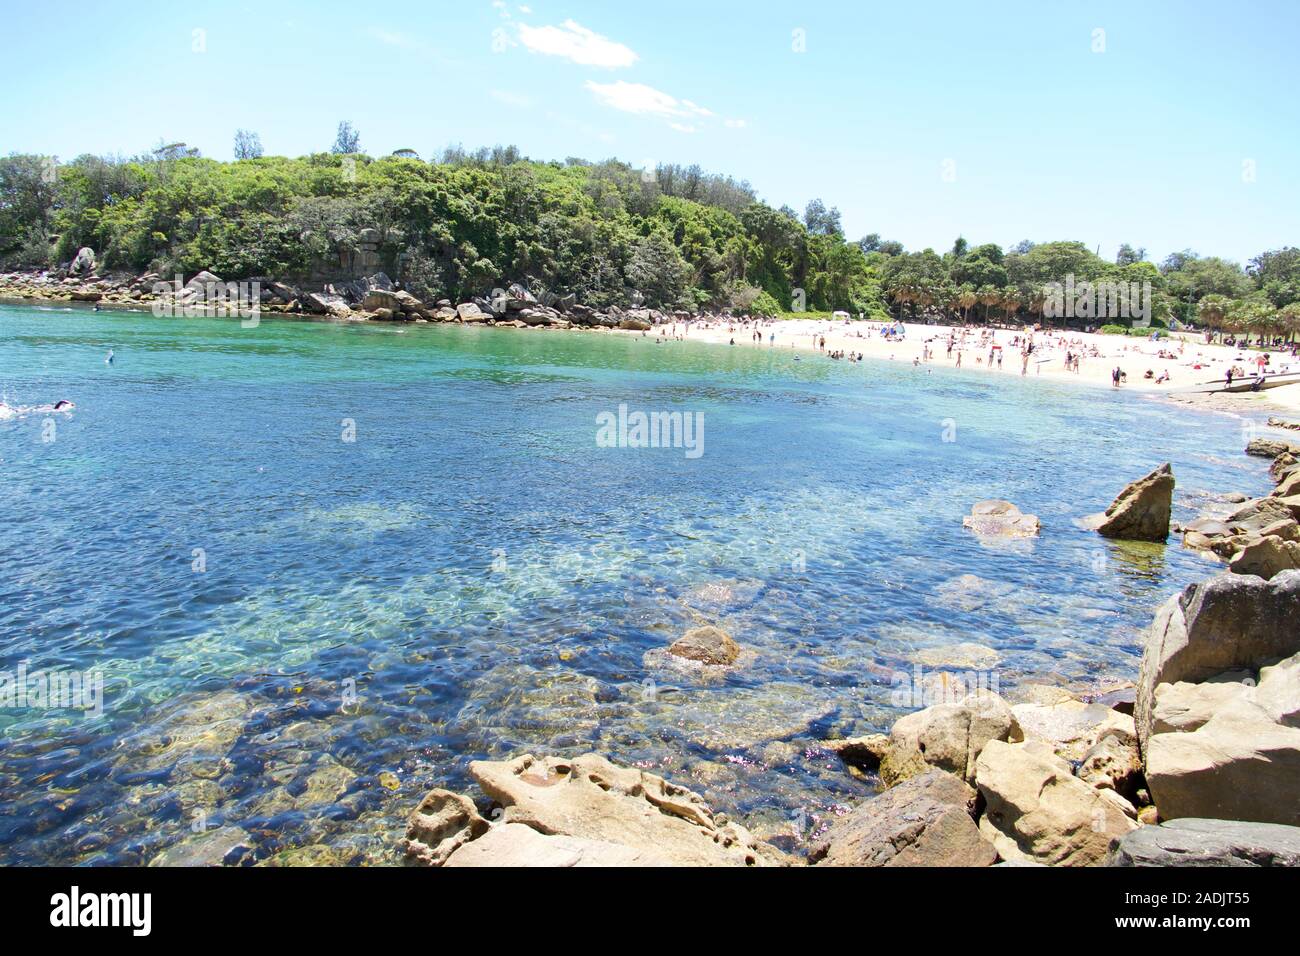 Shelly Beach and Manly Beach, Sydney, New South Wales, Australia, Australasia Stock Photo